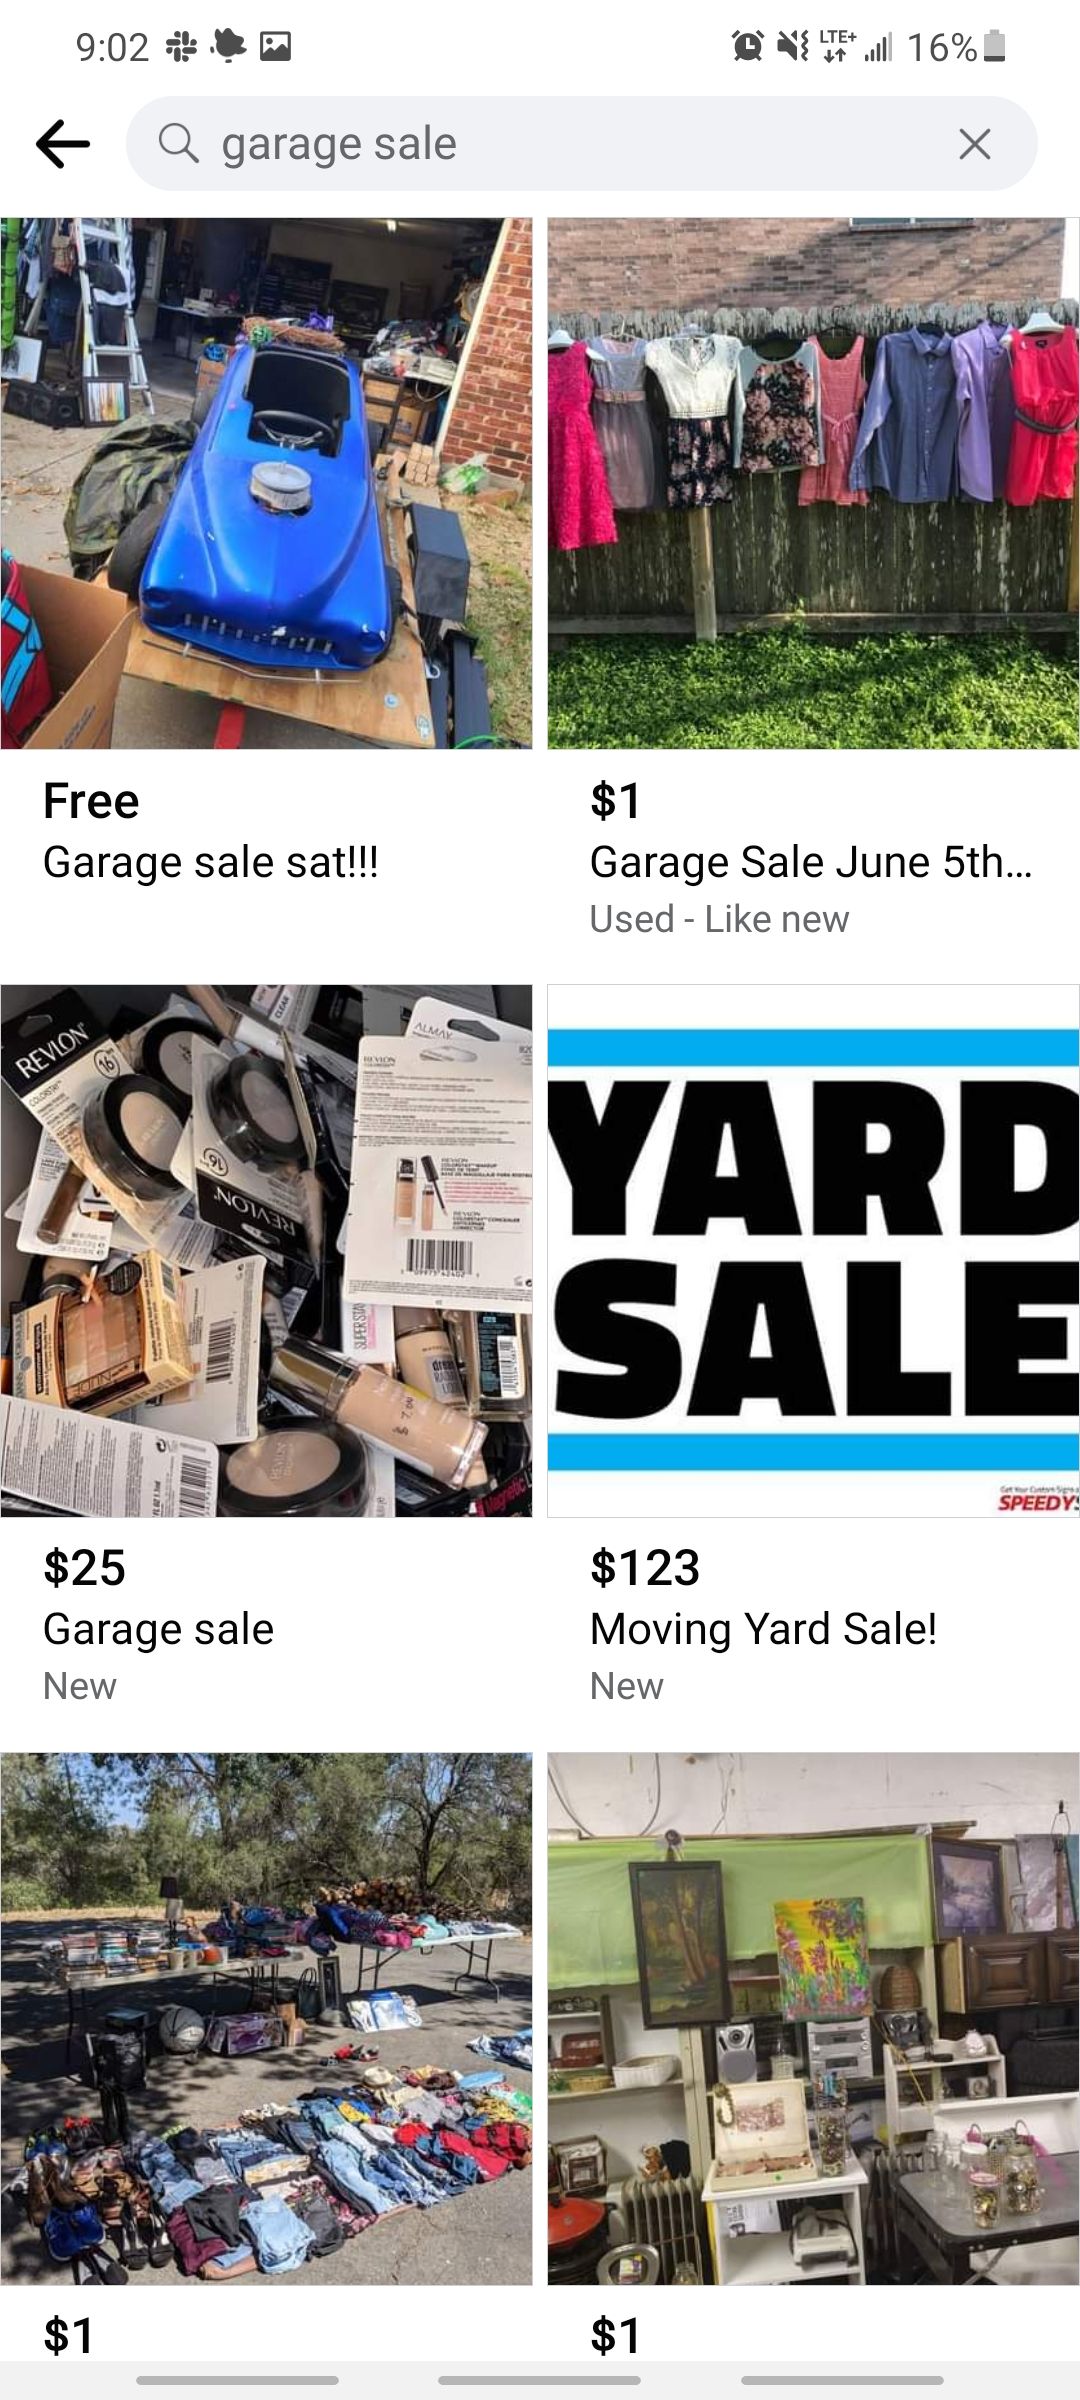 facebook app searching for garage sales in marketplace